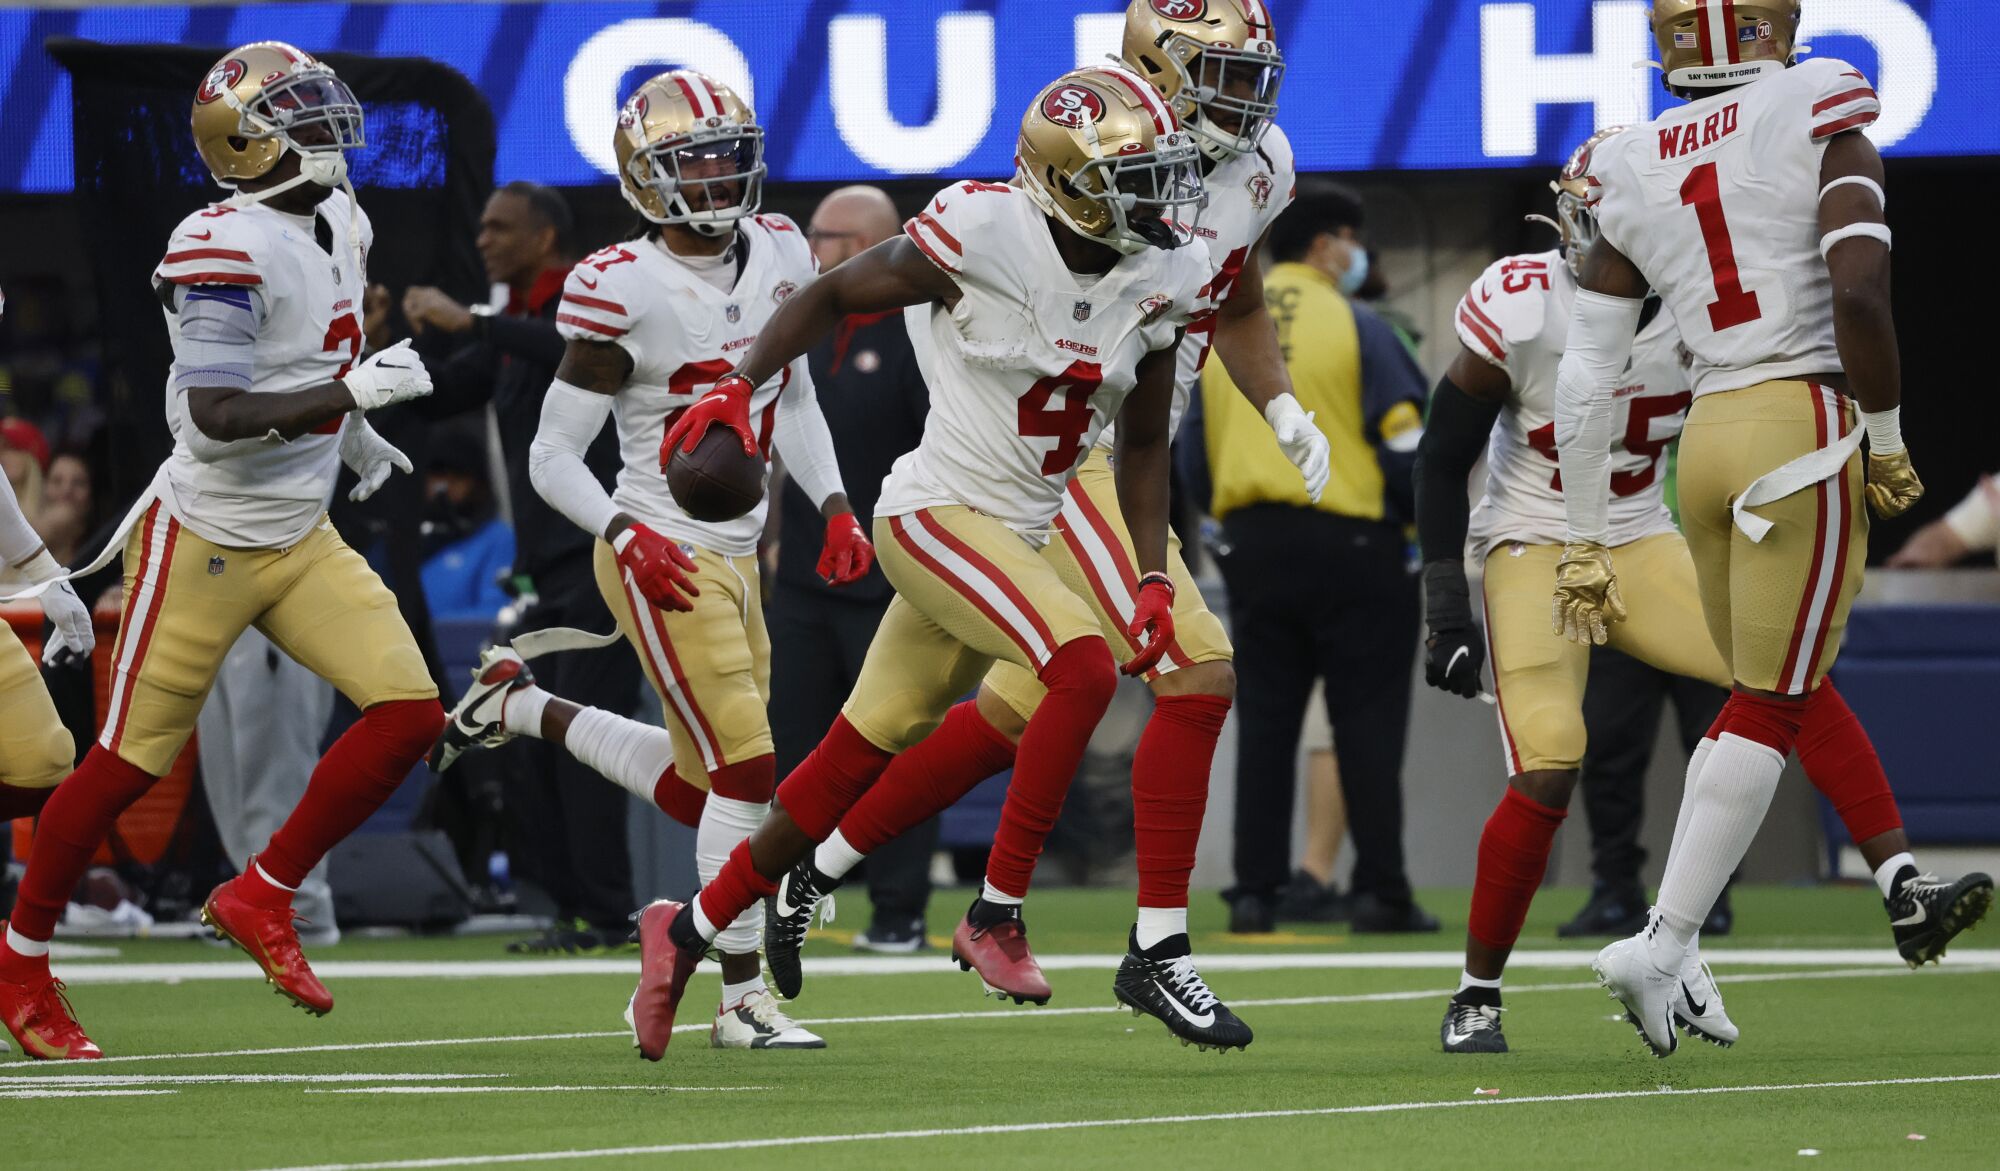 49ers cornerback Emmanuel Moseley reacts with his teammates after intercepting a pass in the second half